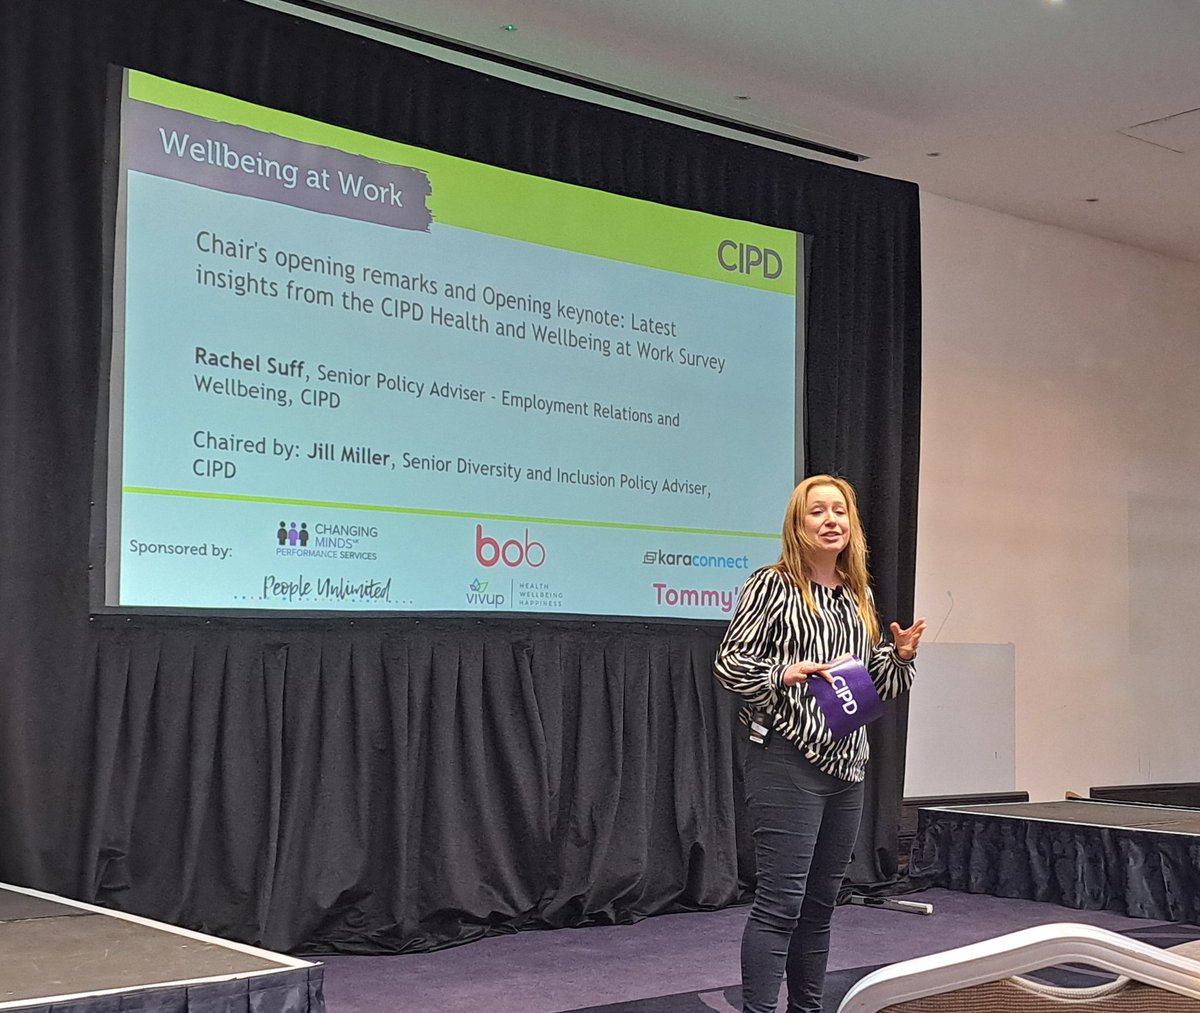 Excited for day 2 of #cipdWW @MillerJillC is opening the session. So good to see so much linkage between wellbeing and EDI in the discussions so far